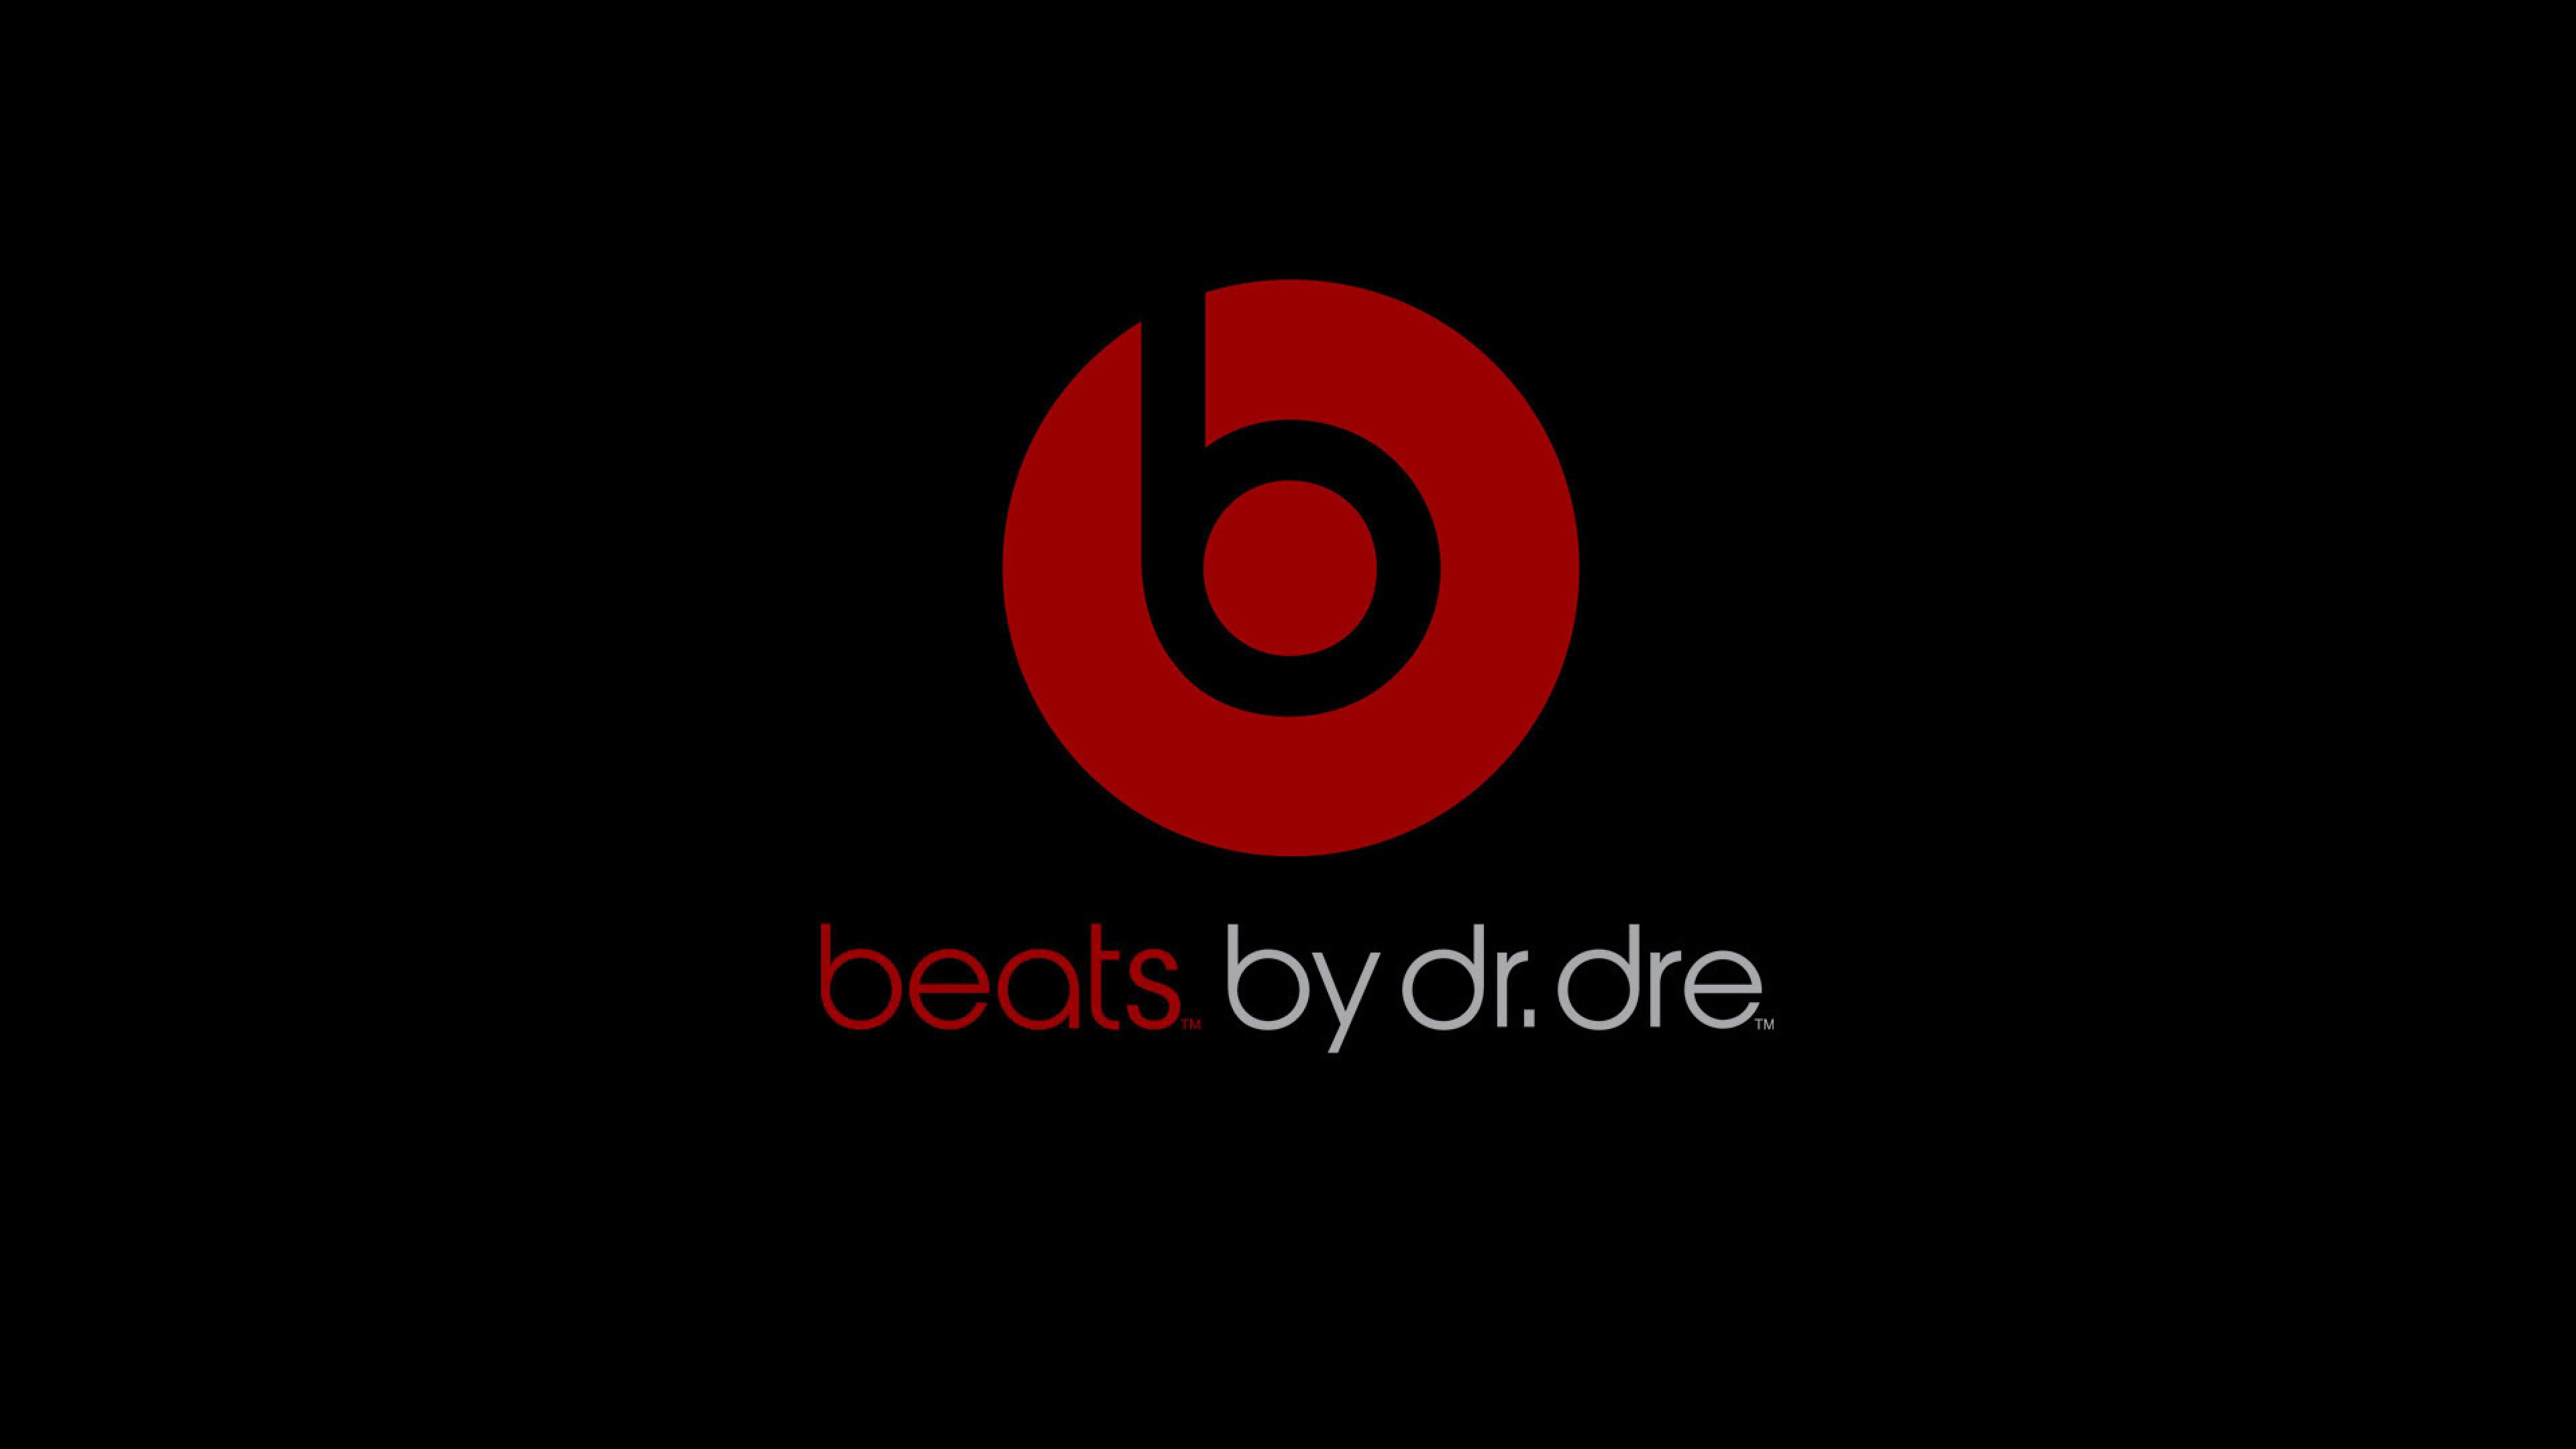 Widescreen Wallpapers of Free Beats By Dre WP DEF BSCB